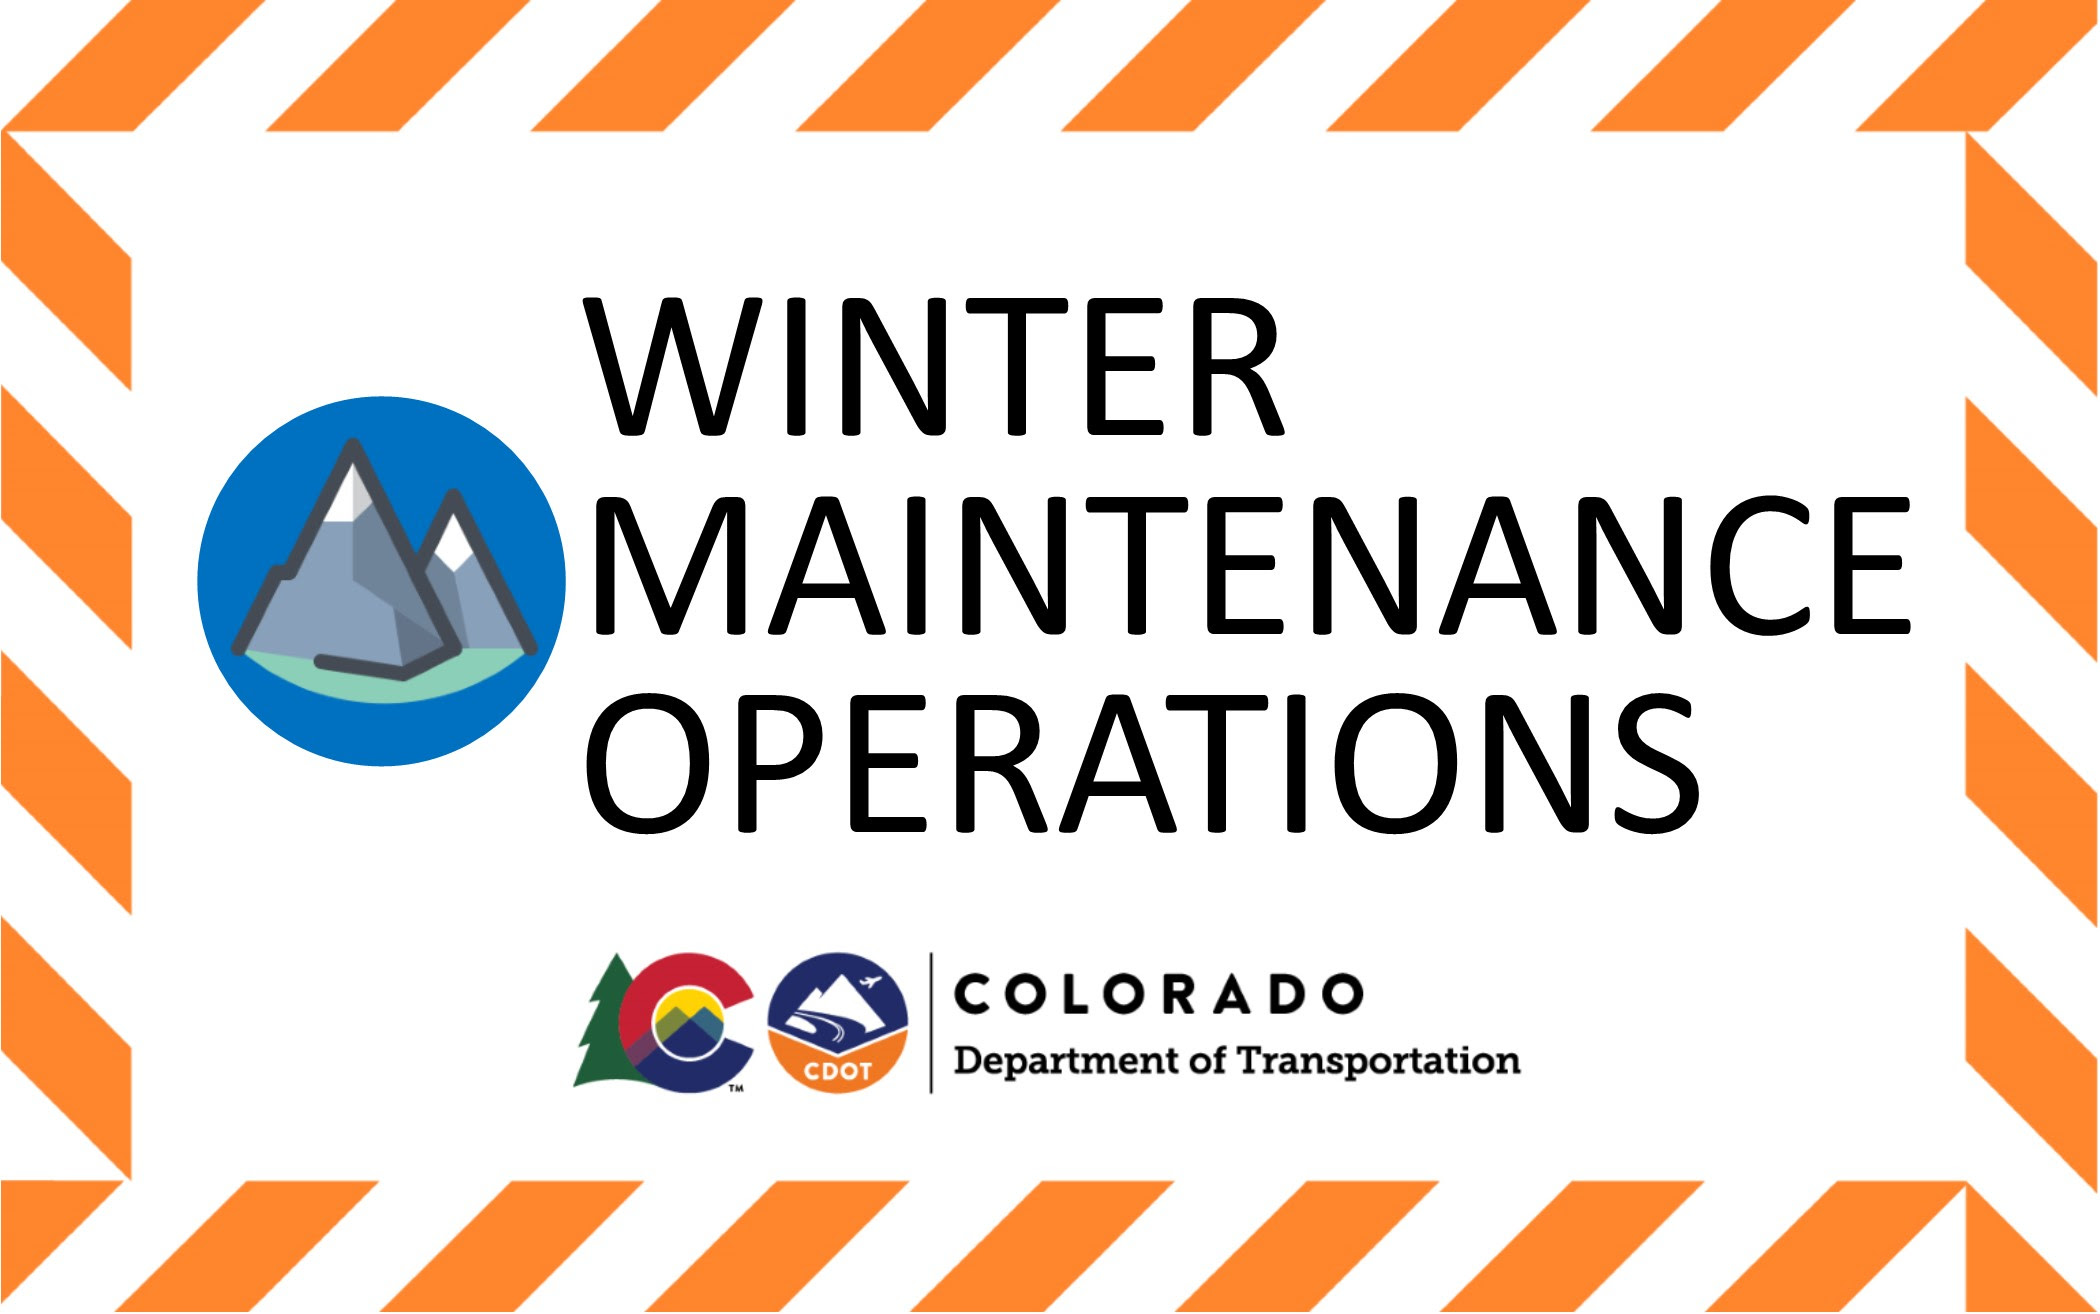 "Winter Maintenance Operations" sign with Colorado Department of Transportation Logo